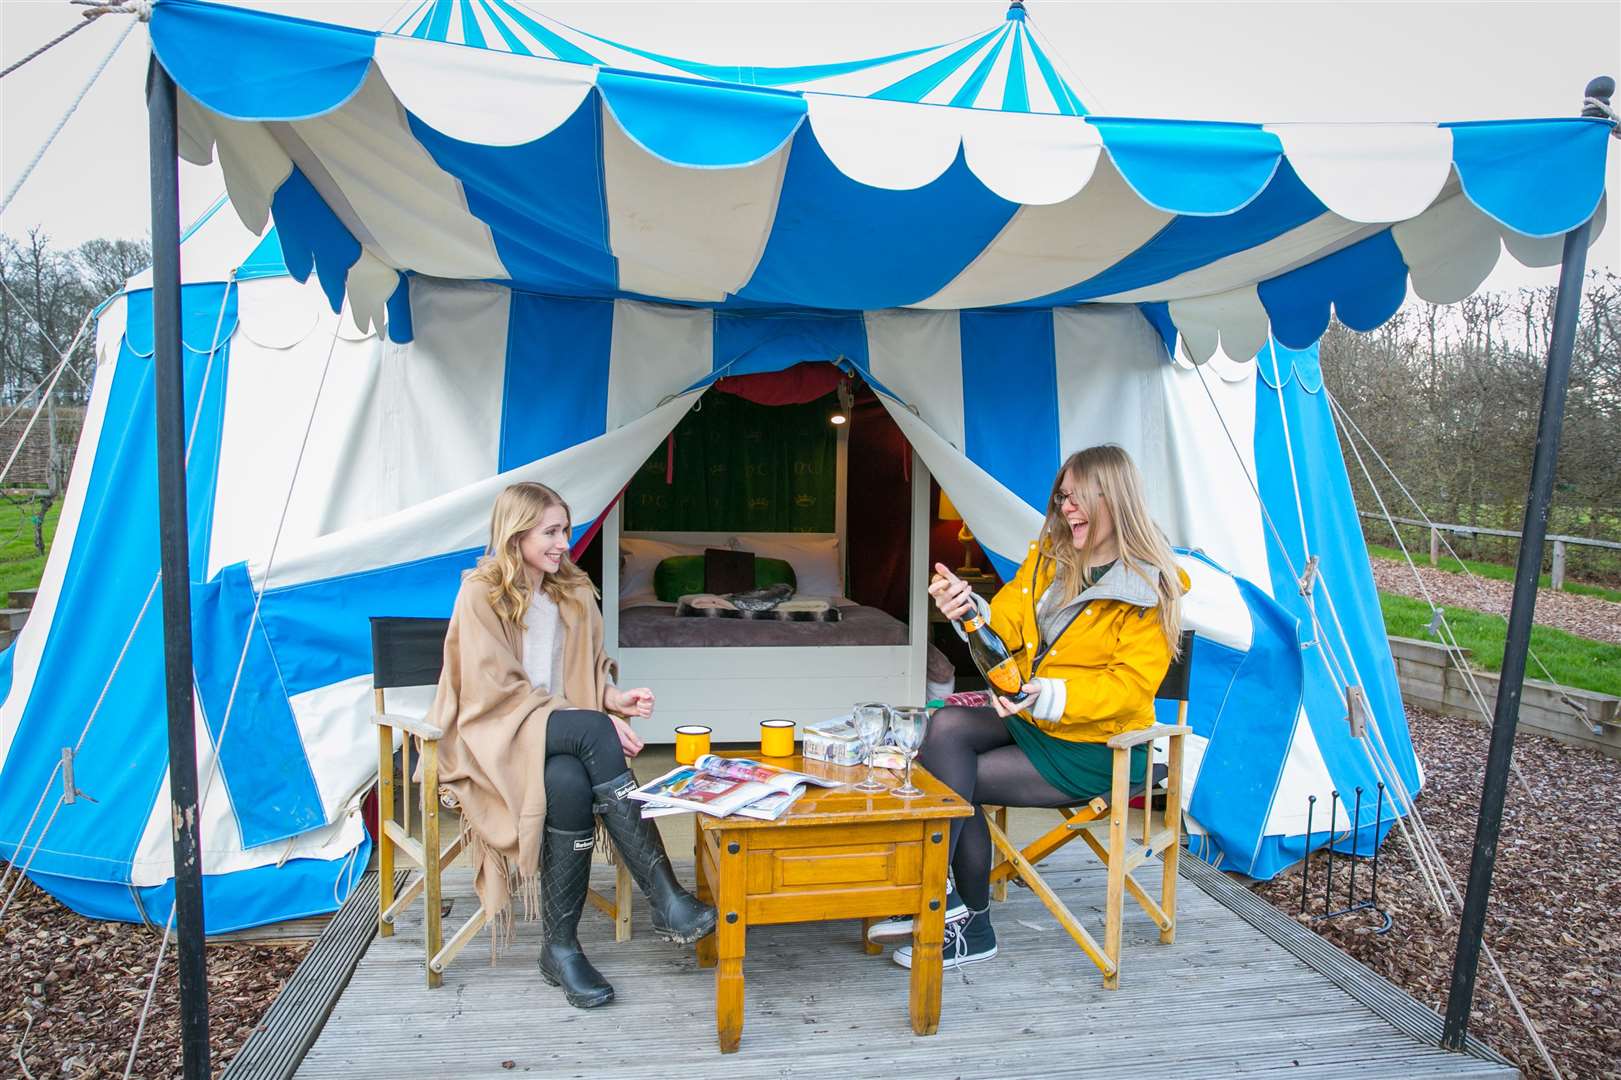 Leeds Castle Glamping is taking bookings for next year Picture: www.matthewwalkerphotography.com